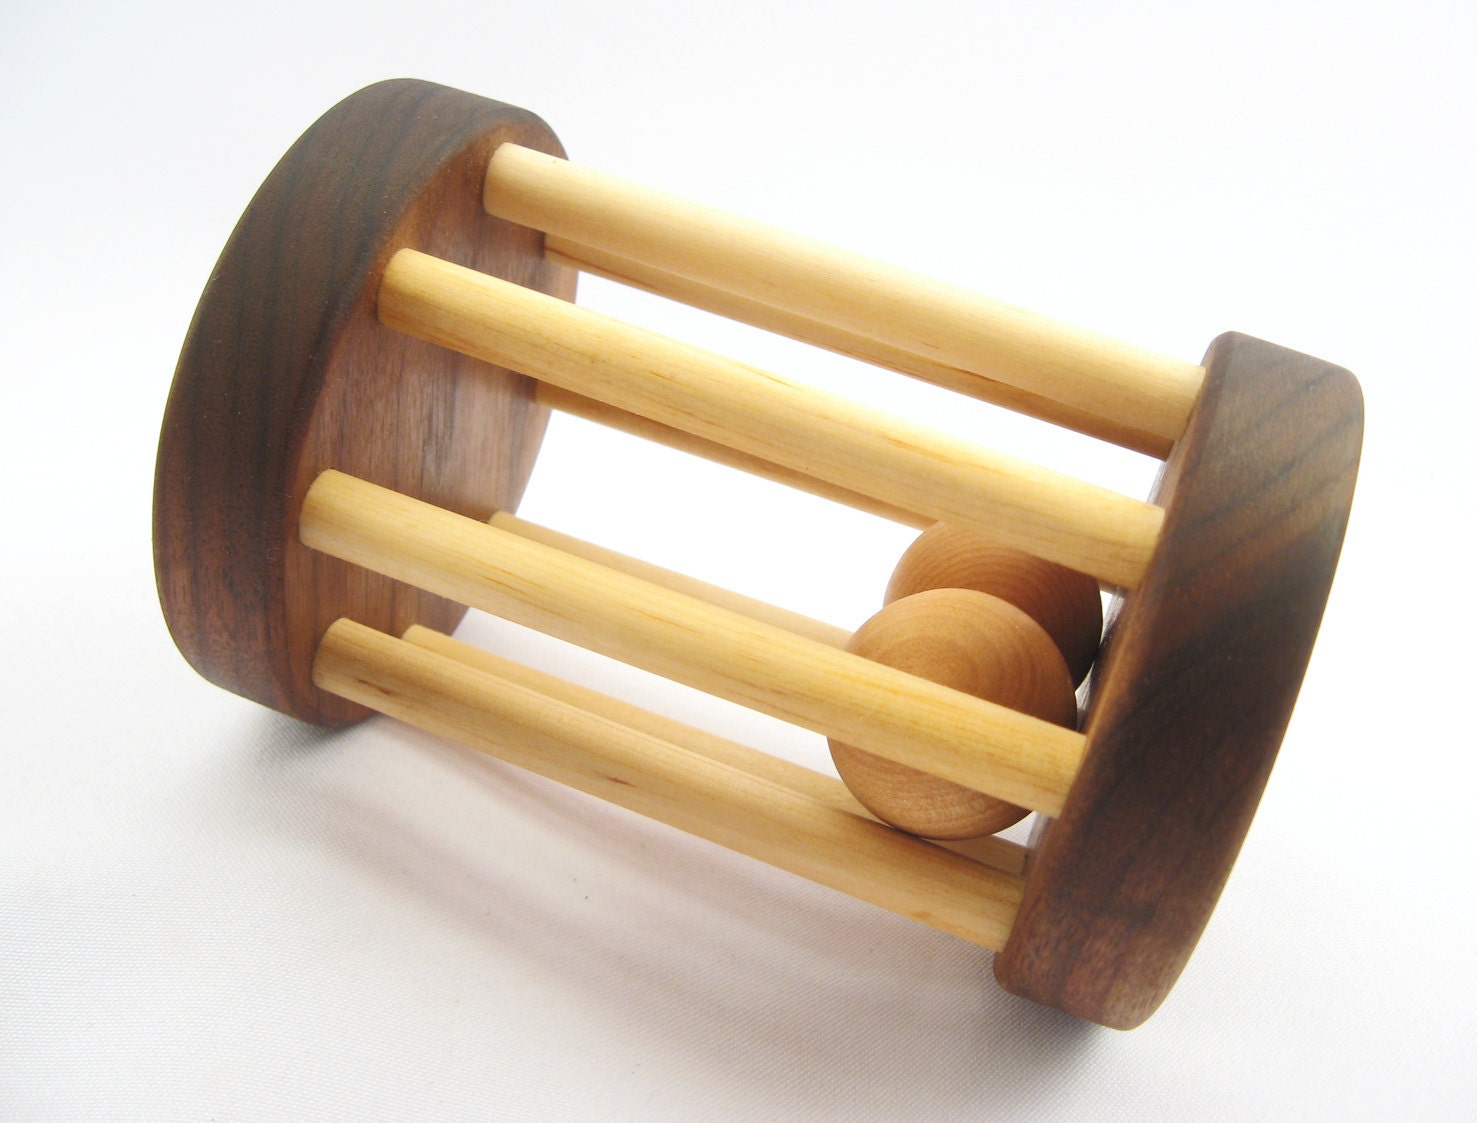 wood rattle for baby, all natural wooden toy, organic finish, teether safe, fun for eco-friendly baby, toddler, children